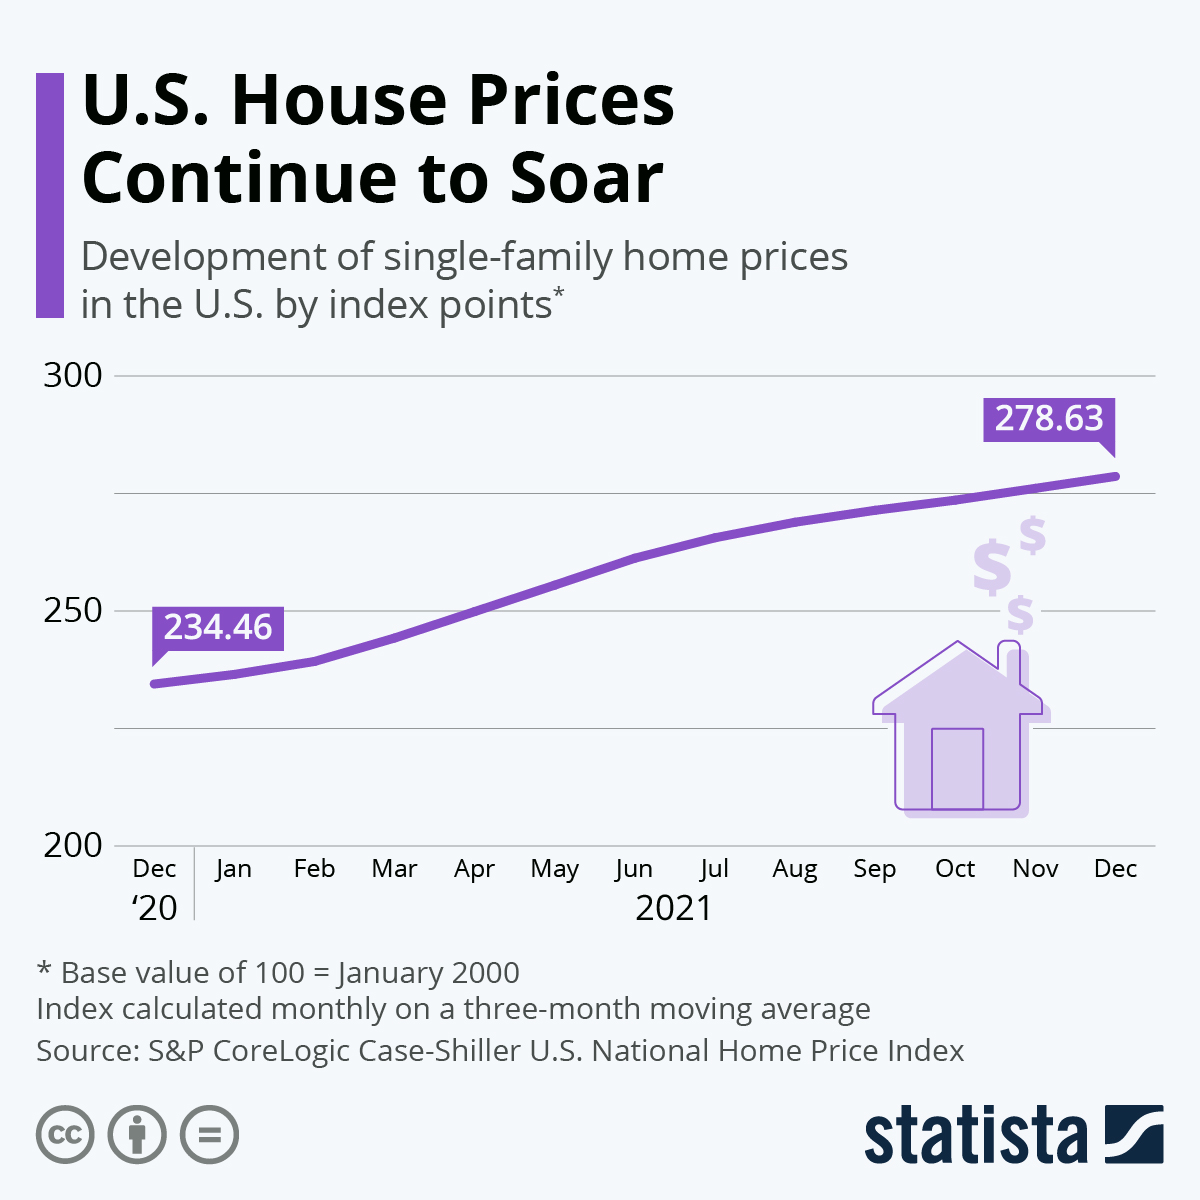 U.S. House Prices Continue to Soar